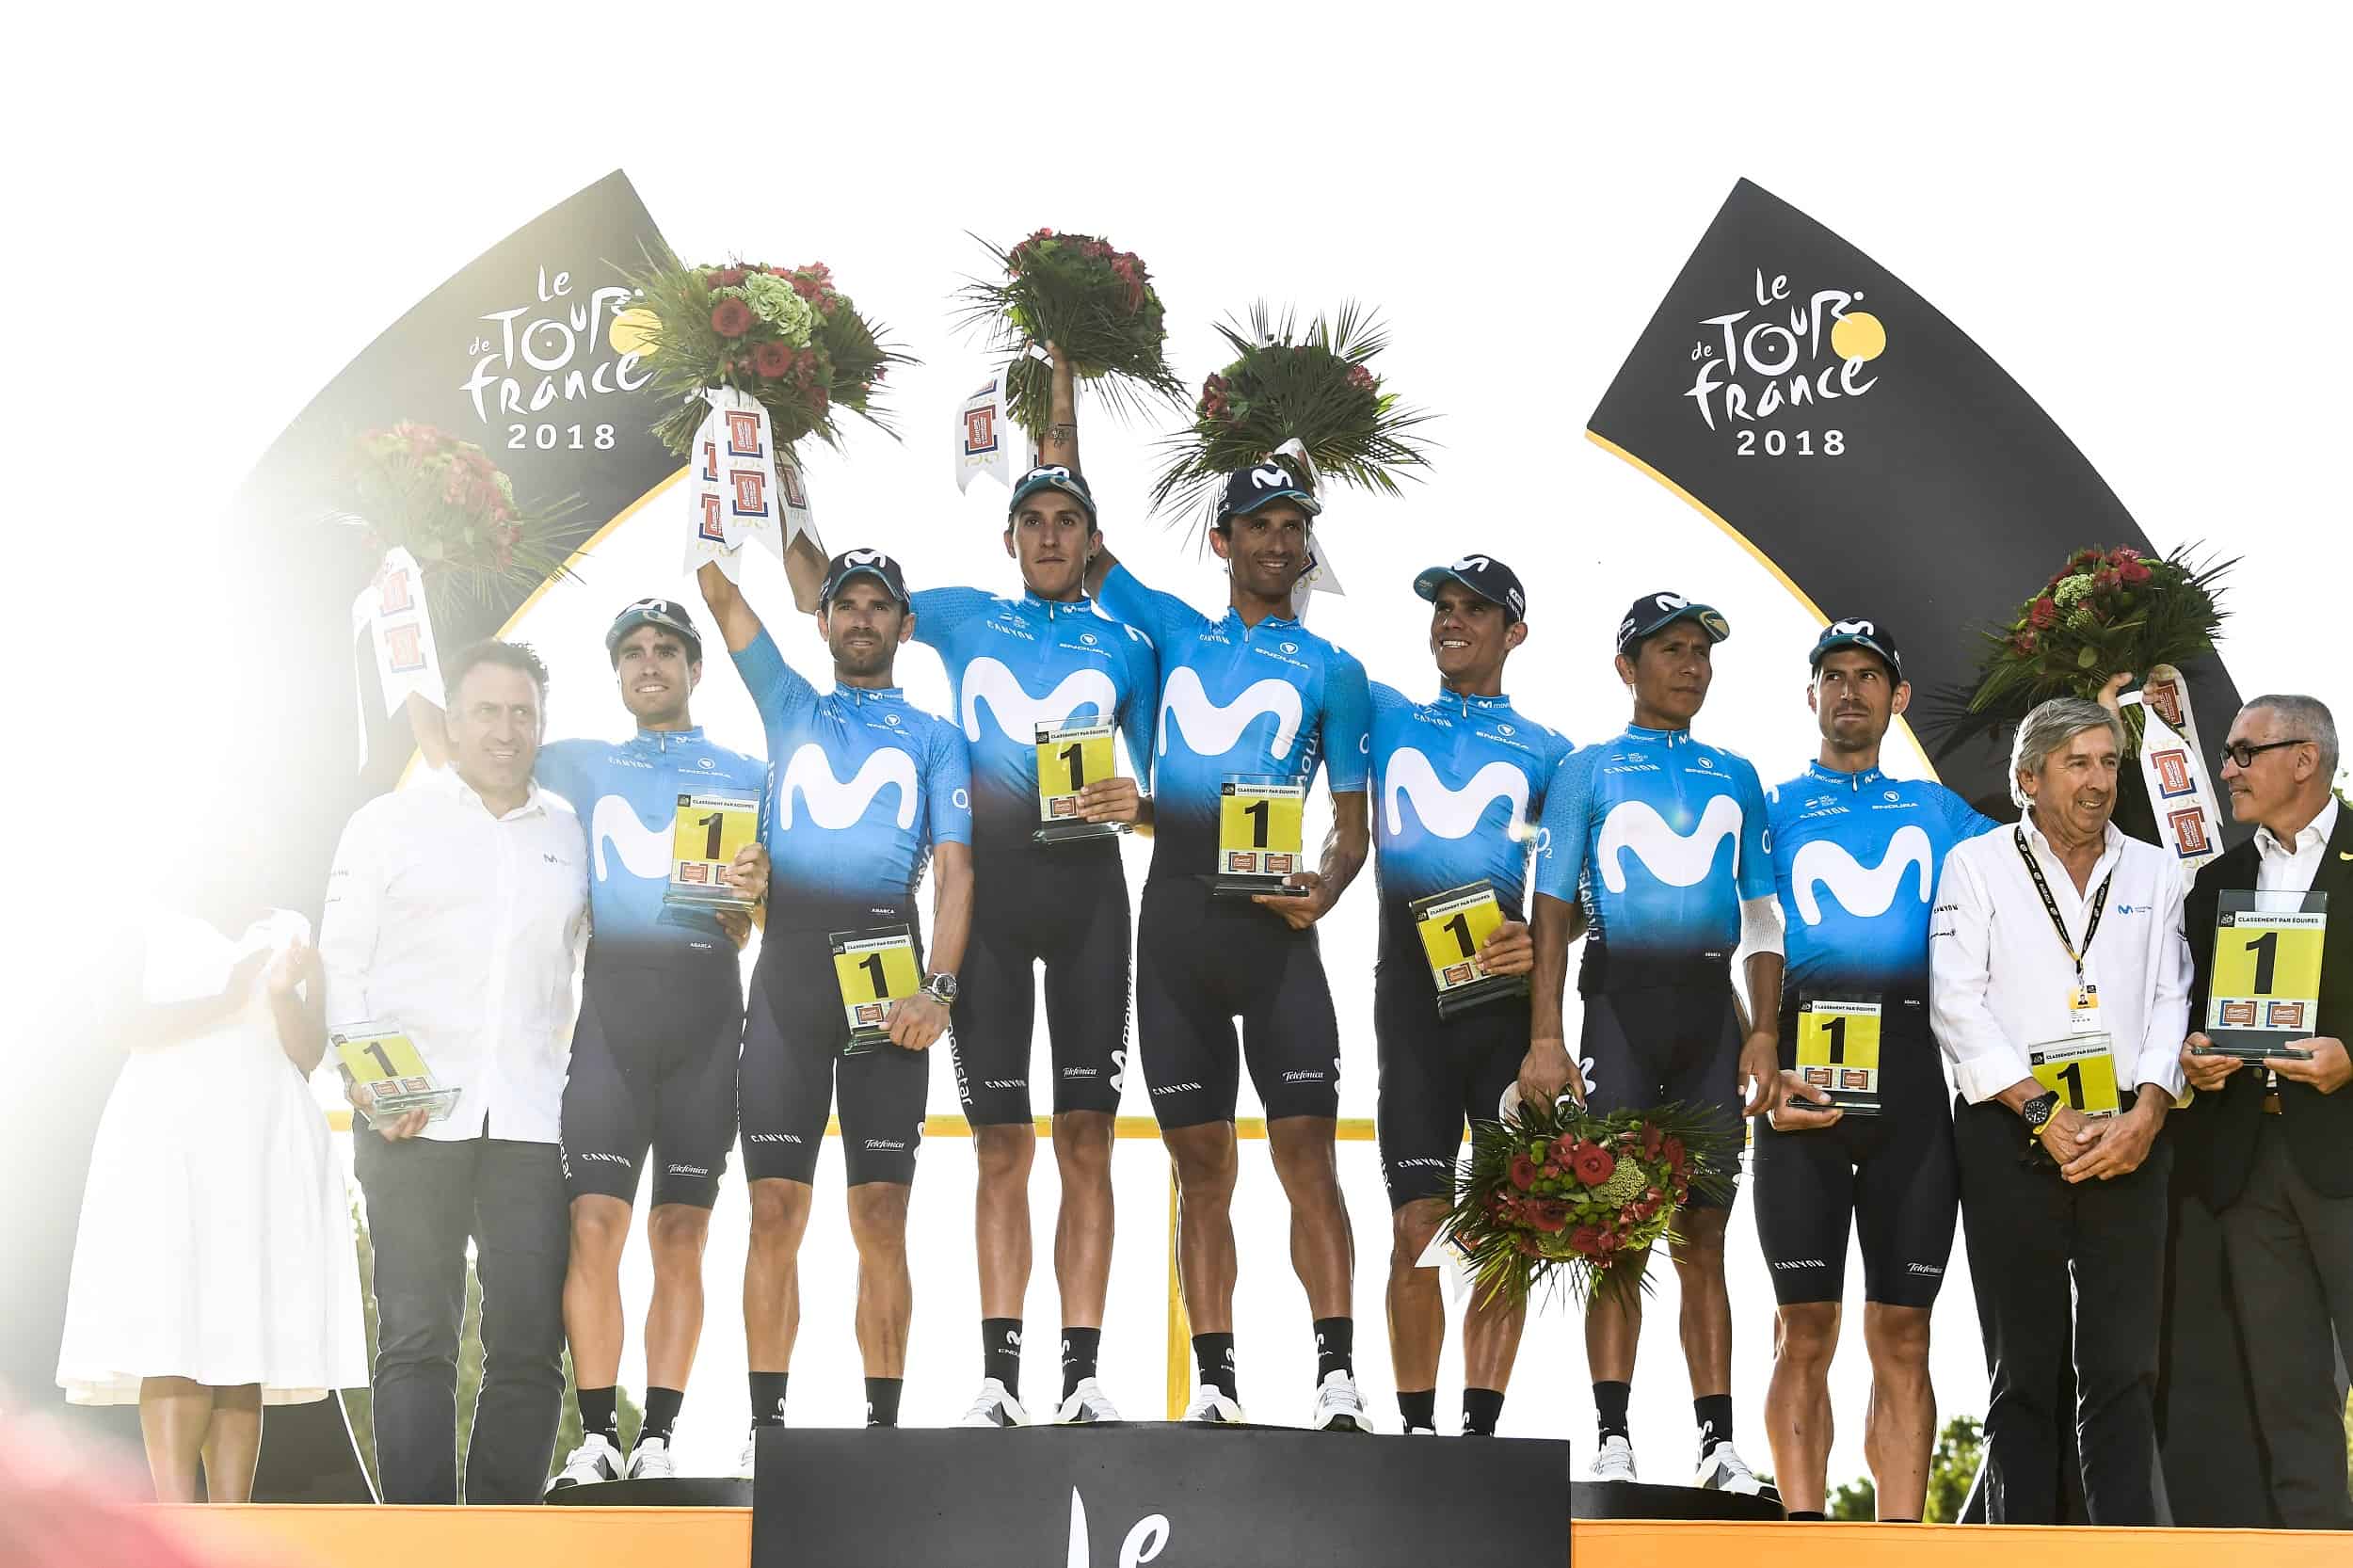 Andrey Amador and Movistar win best team in Tour de France